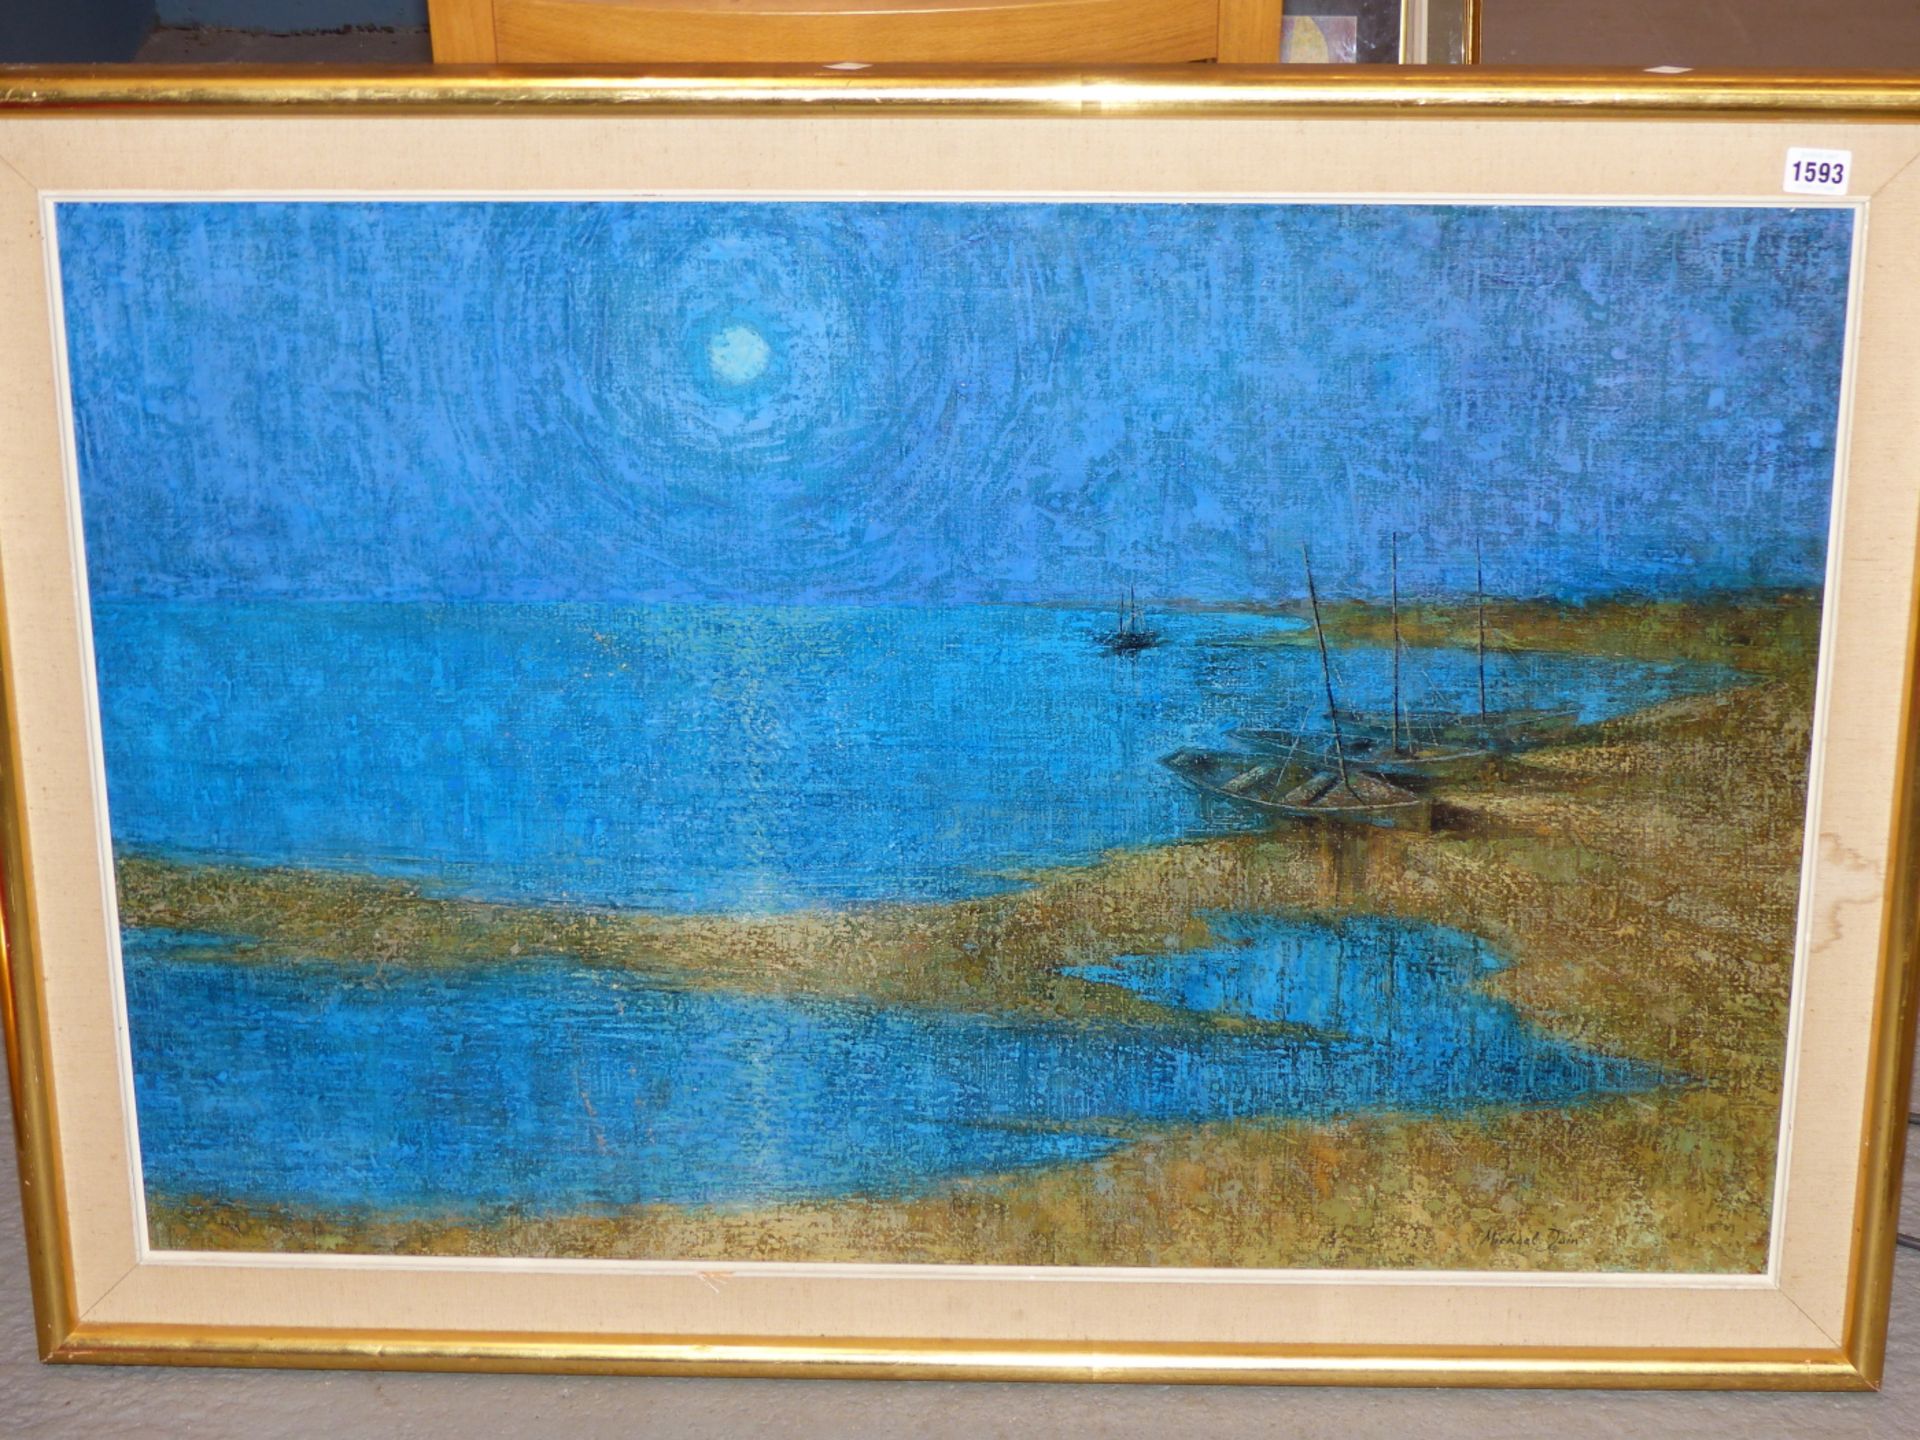 MICHAEL JAIN. ( 20TH CENTURY) ARR. BOATS ON THE SHORELINE BY MOONLIGHT. OIL ON CANVAS. SIGNED L/R. - Image 2 of 6